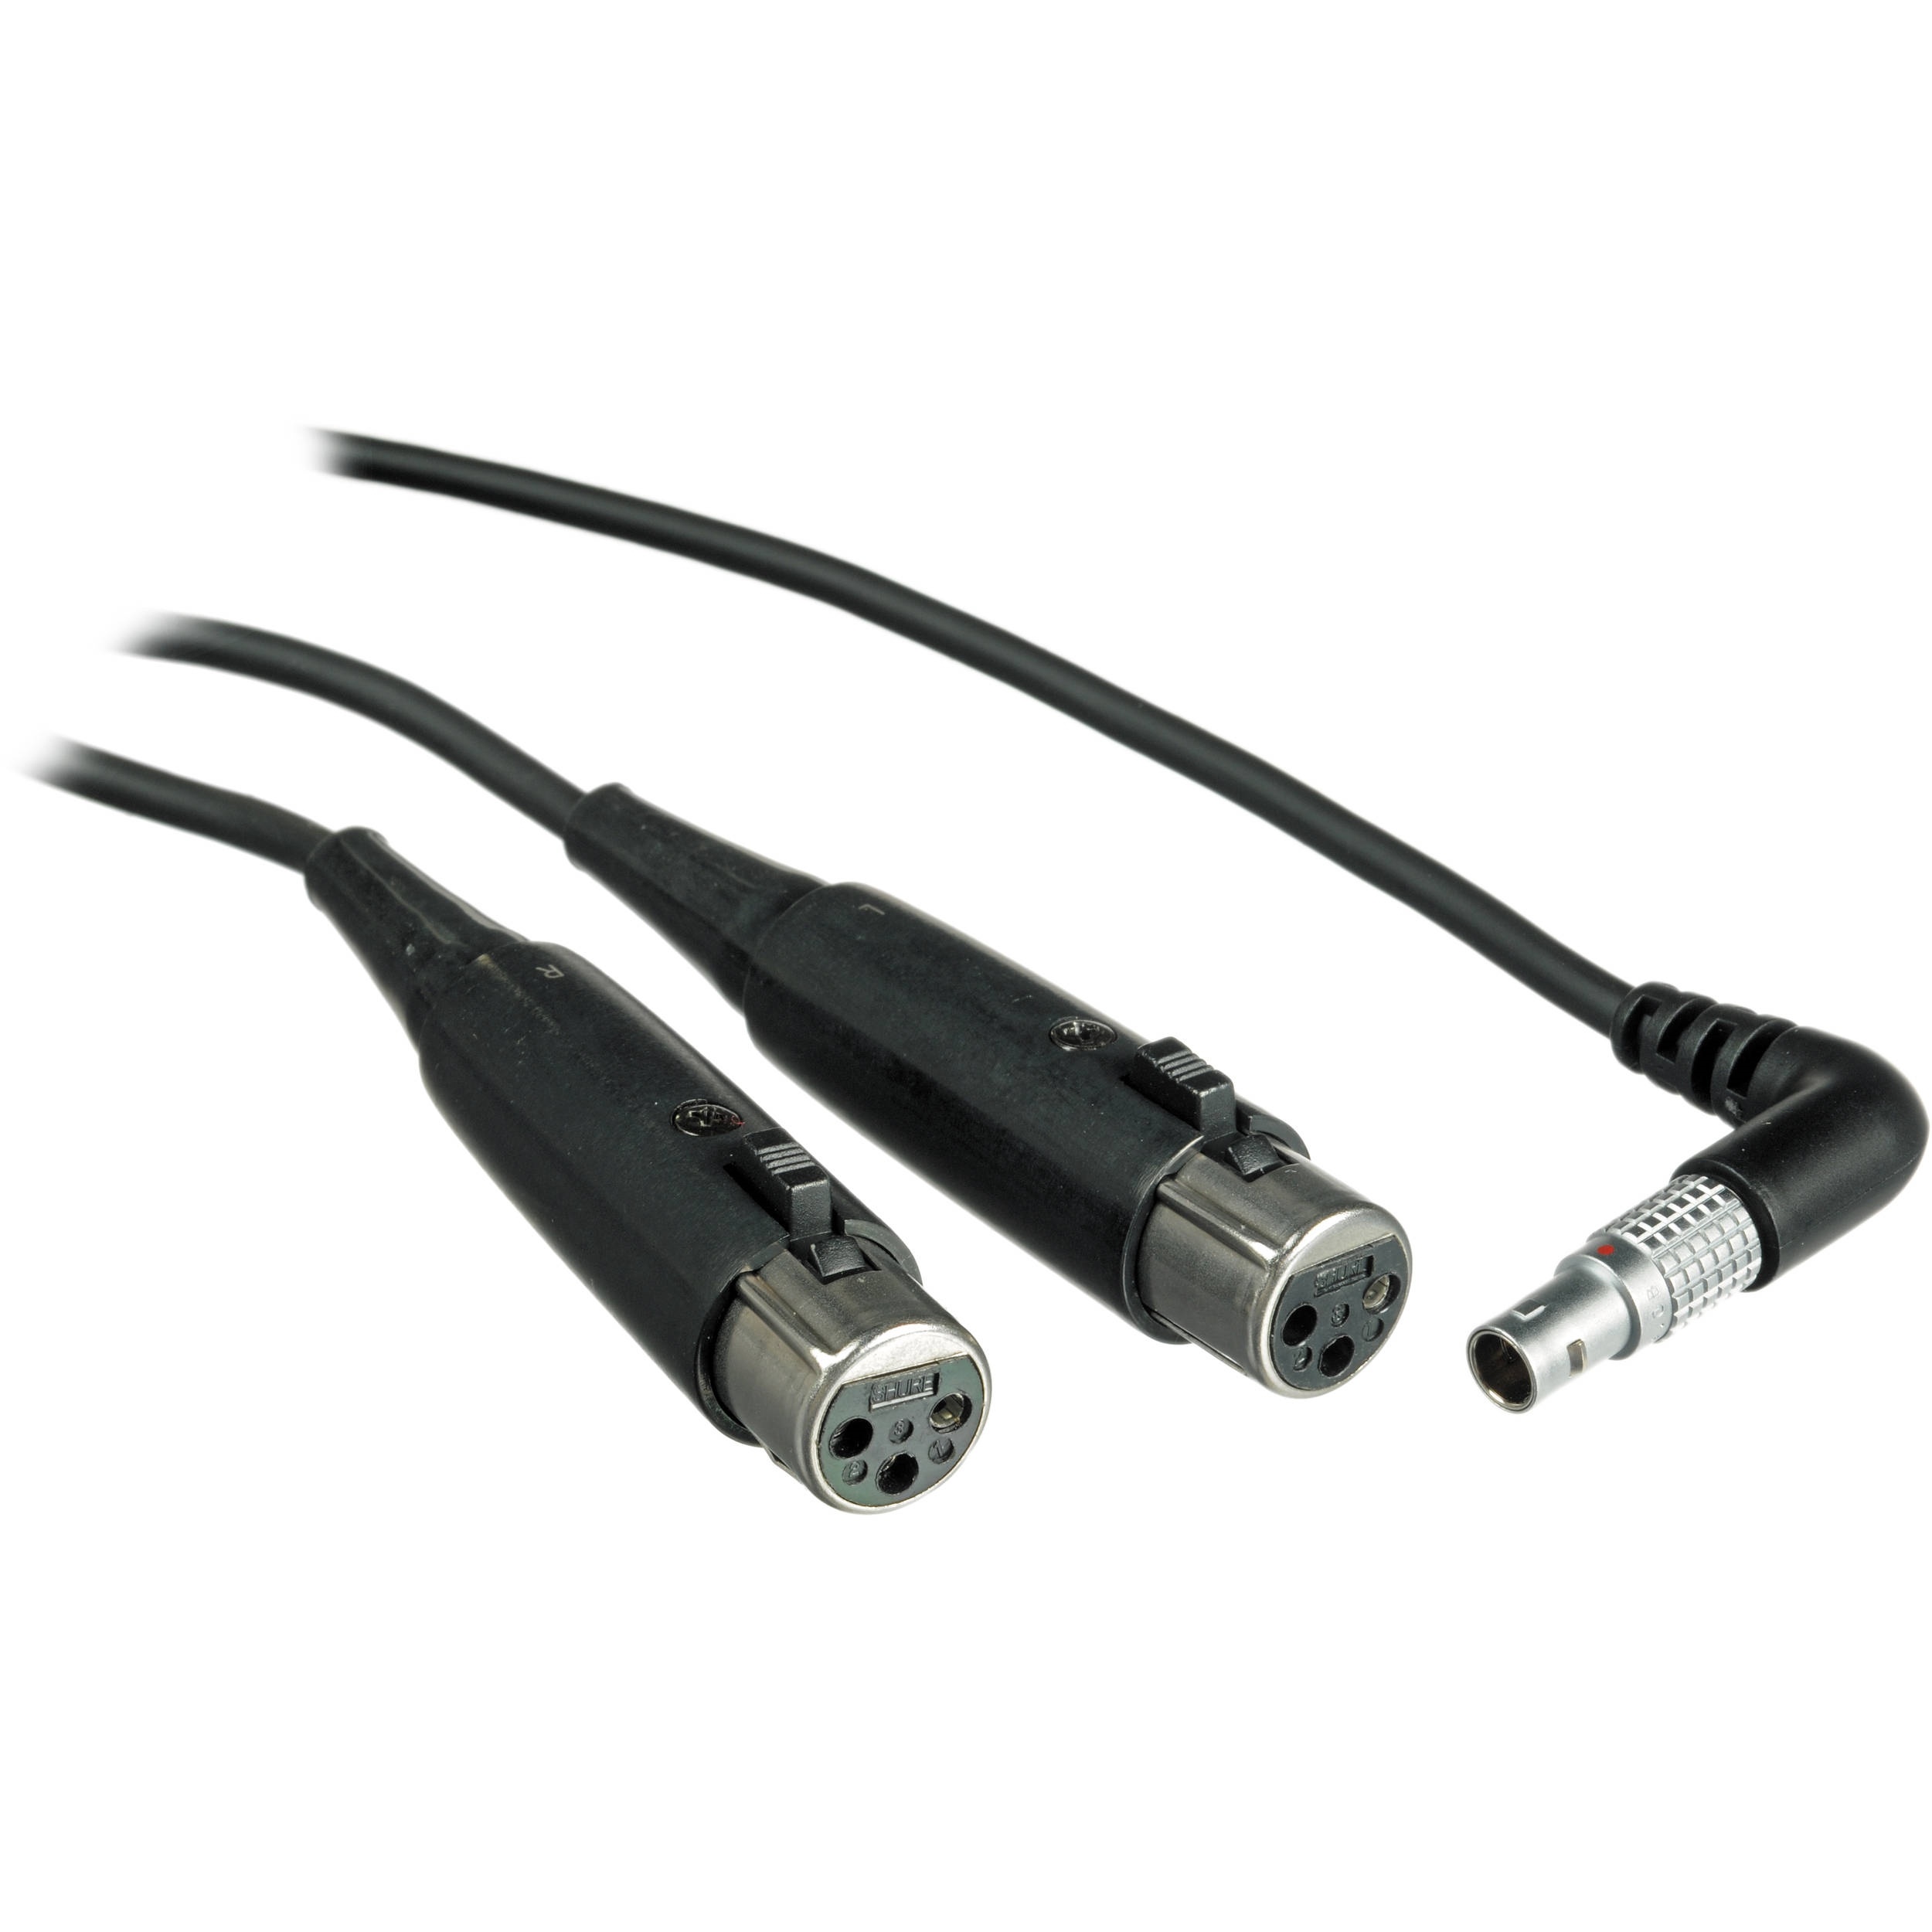 Shure PA720 Replacement Input Cable for P6HW Hardwired Beltpack Monitor